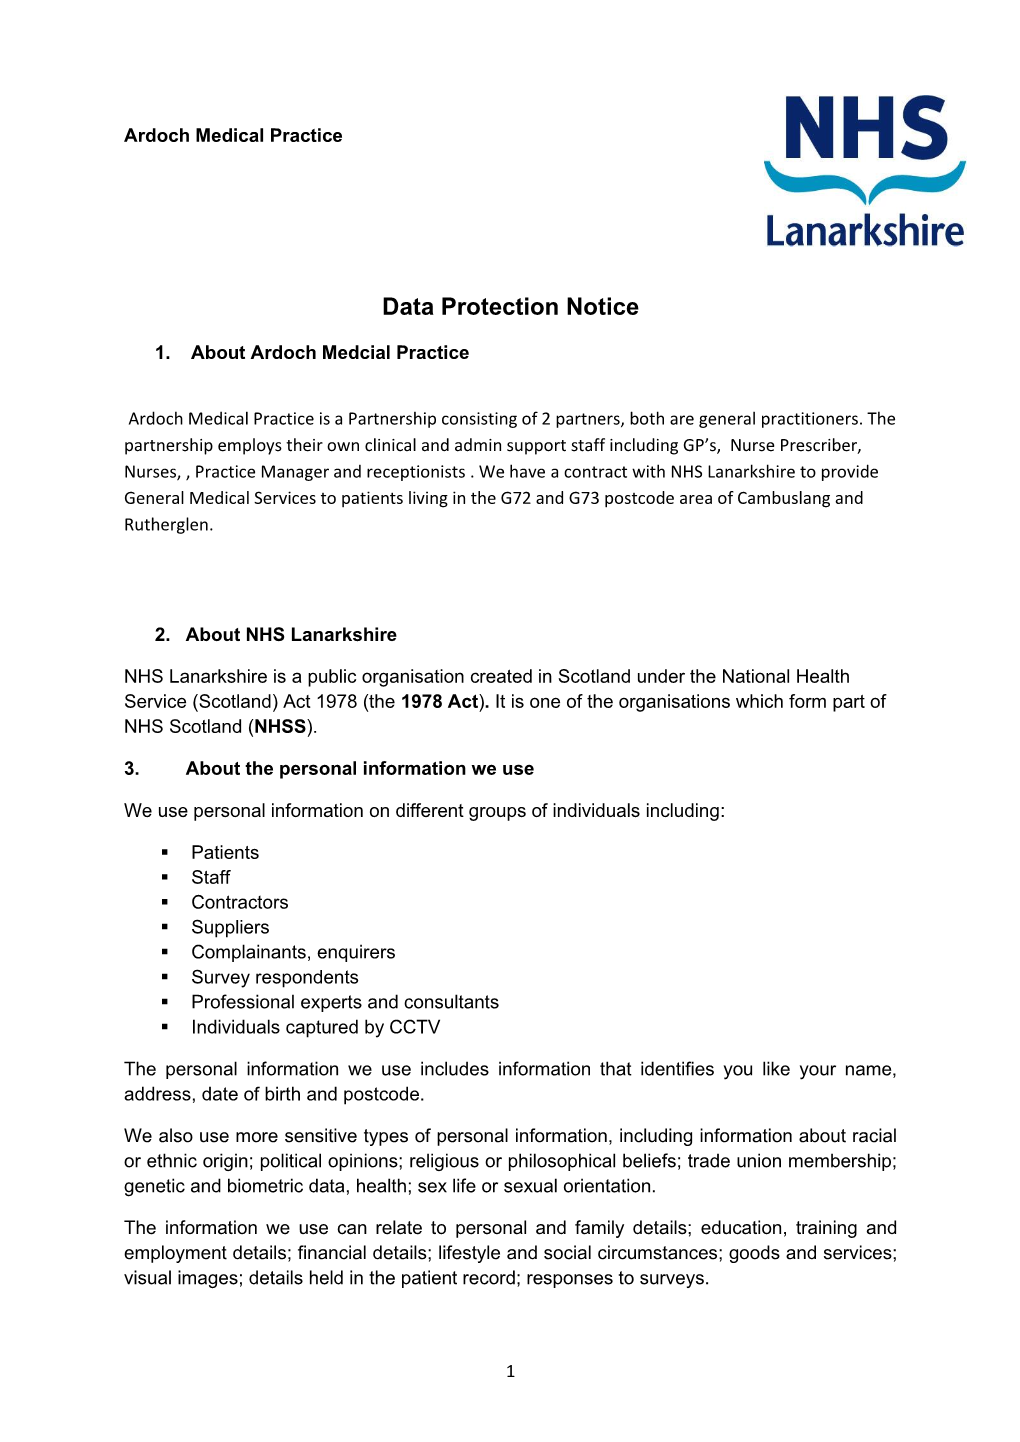 Data Protection Notice